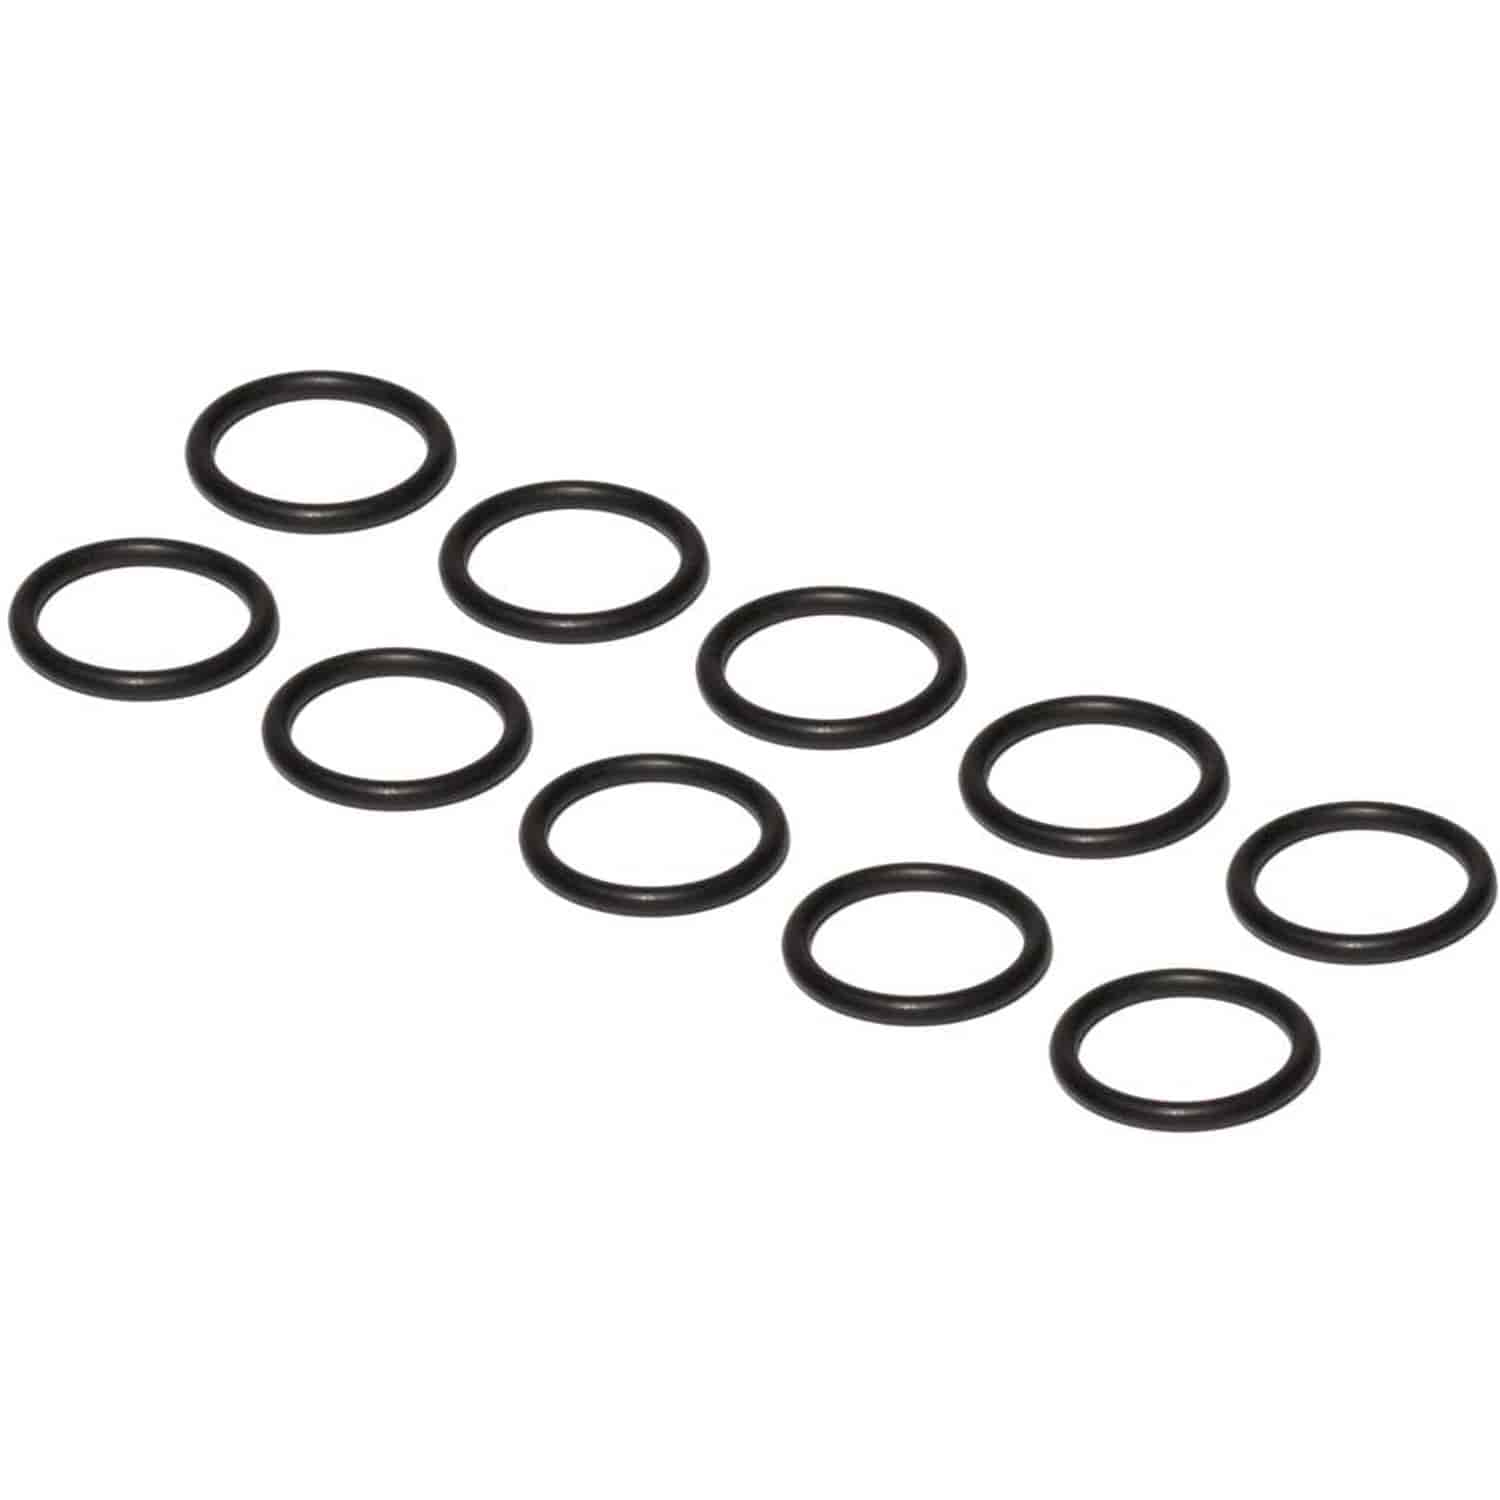 O-RING FOR 54023A / 54023B 10 PACK